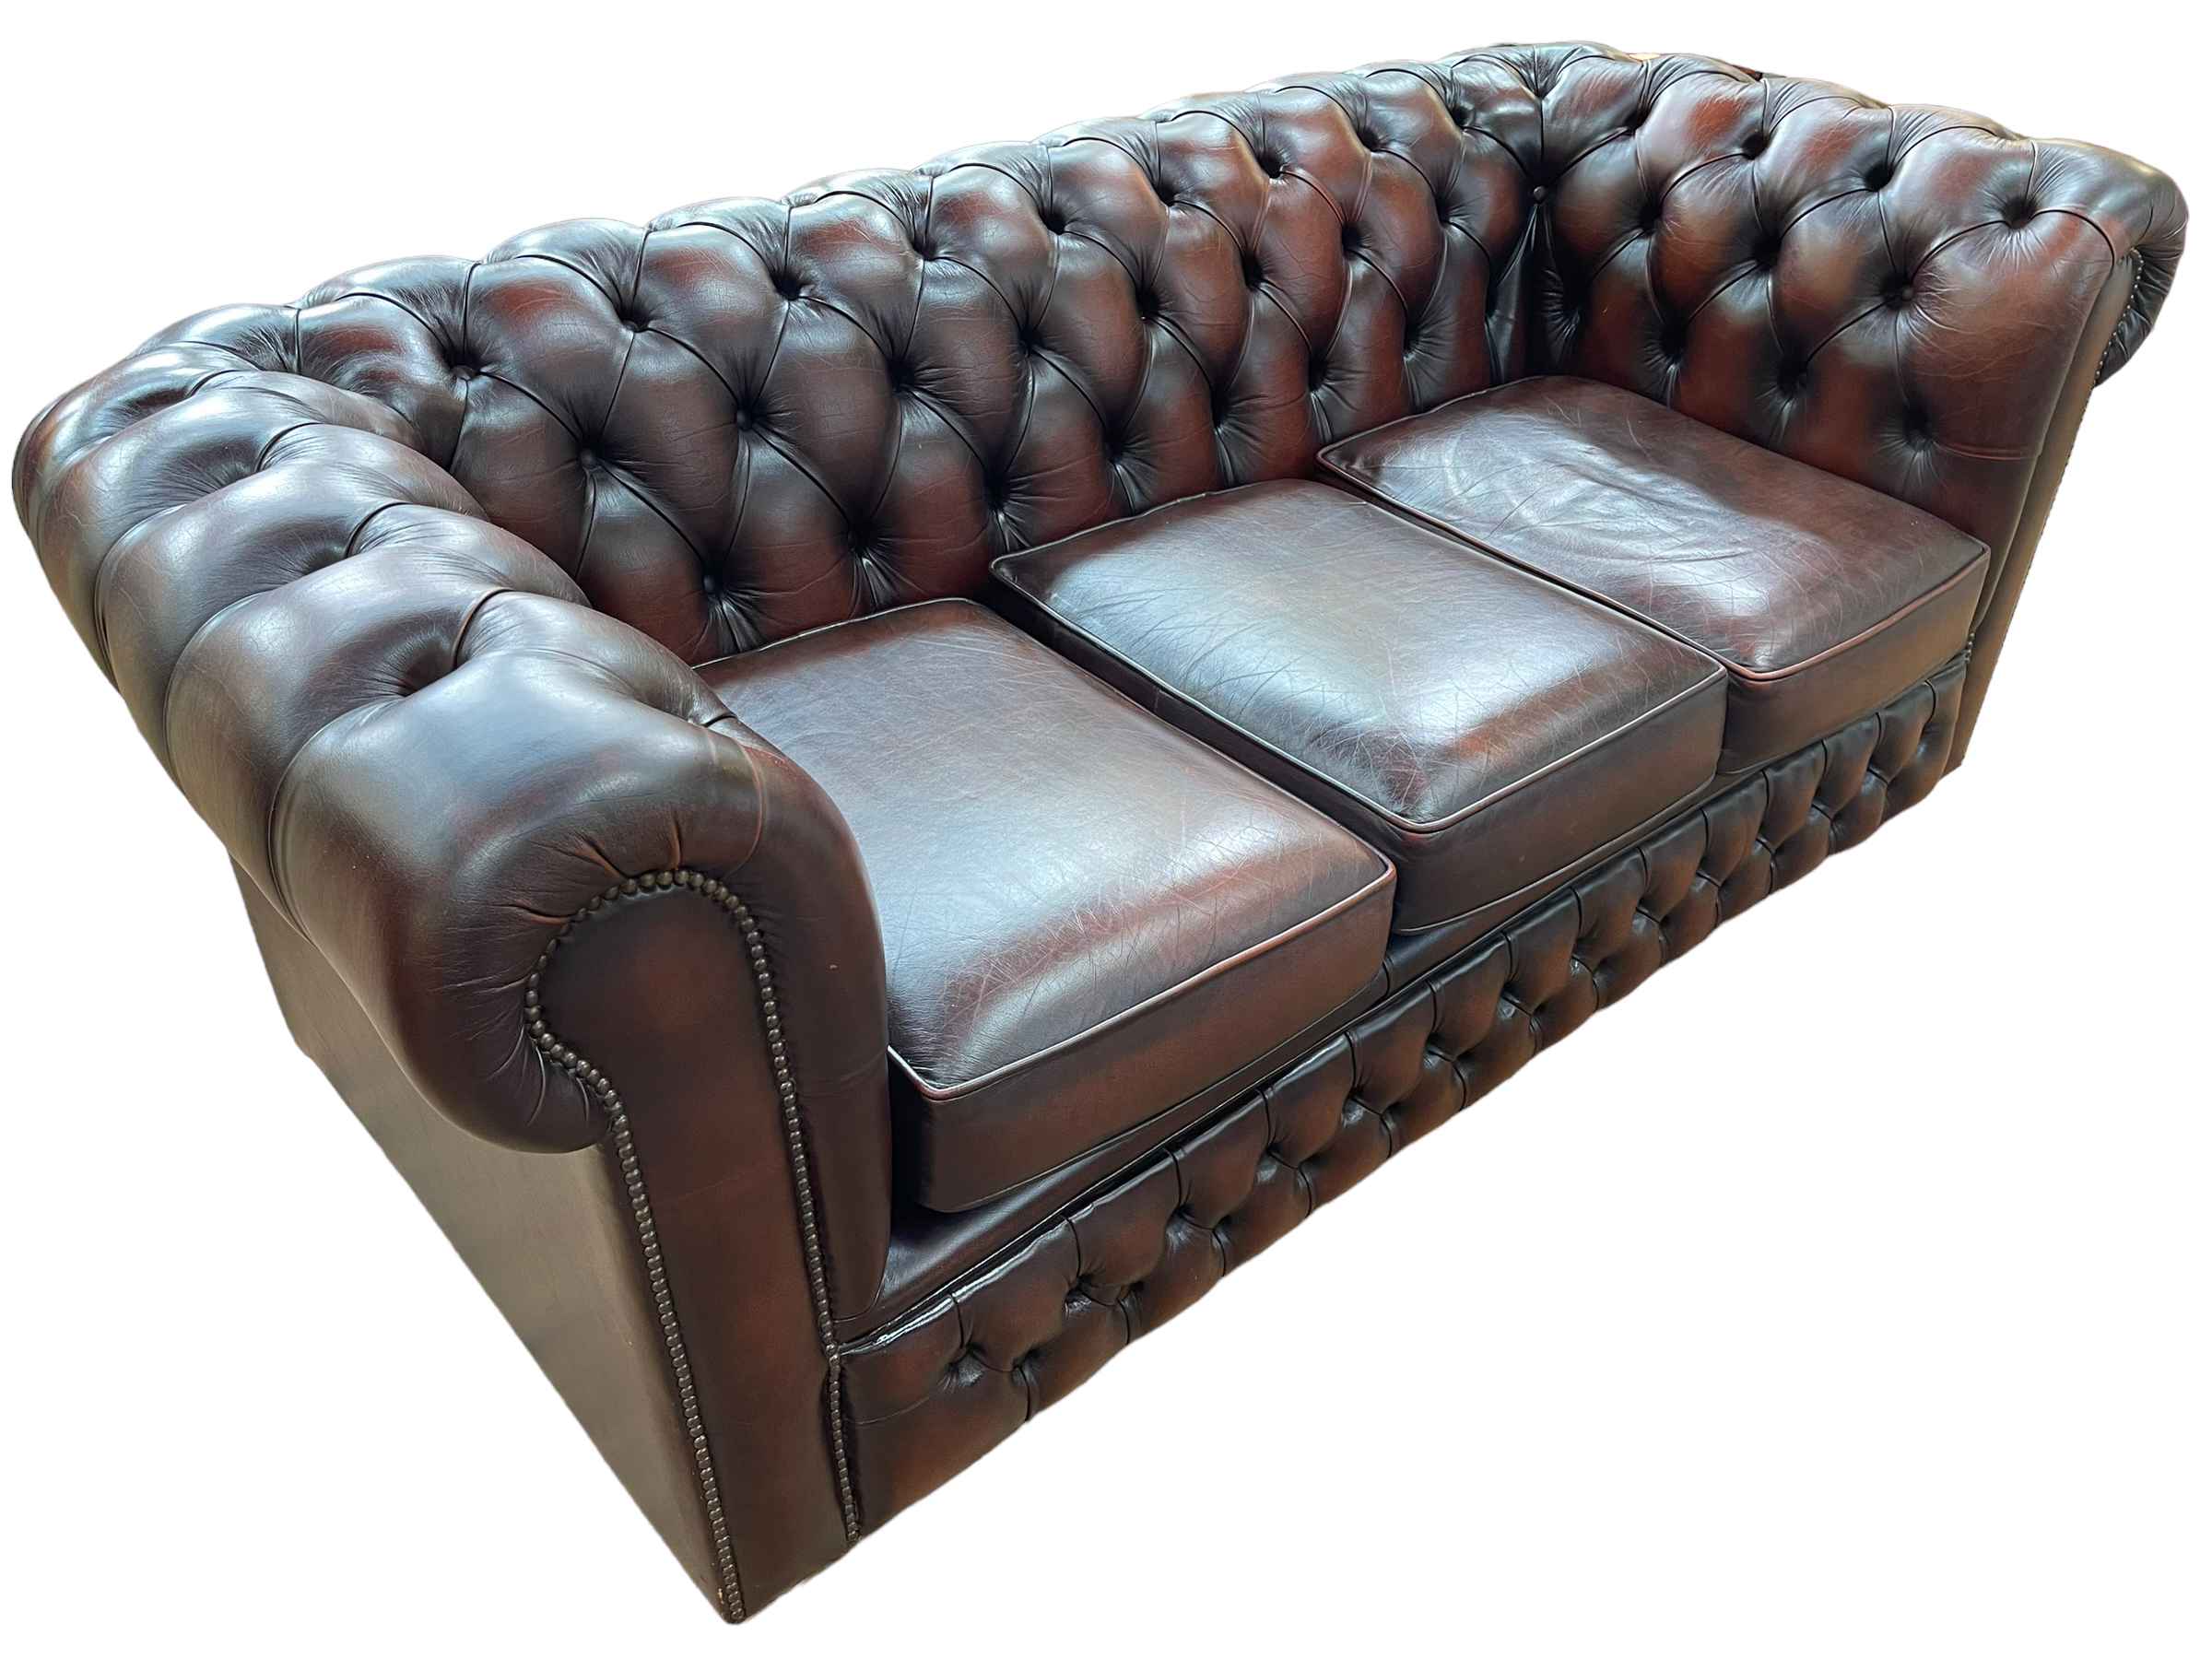 Brown deep buttoned and studded leather three seater Chesterfield settee, 74cm by 193cm by 89cm.